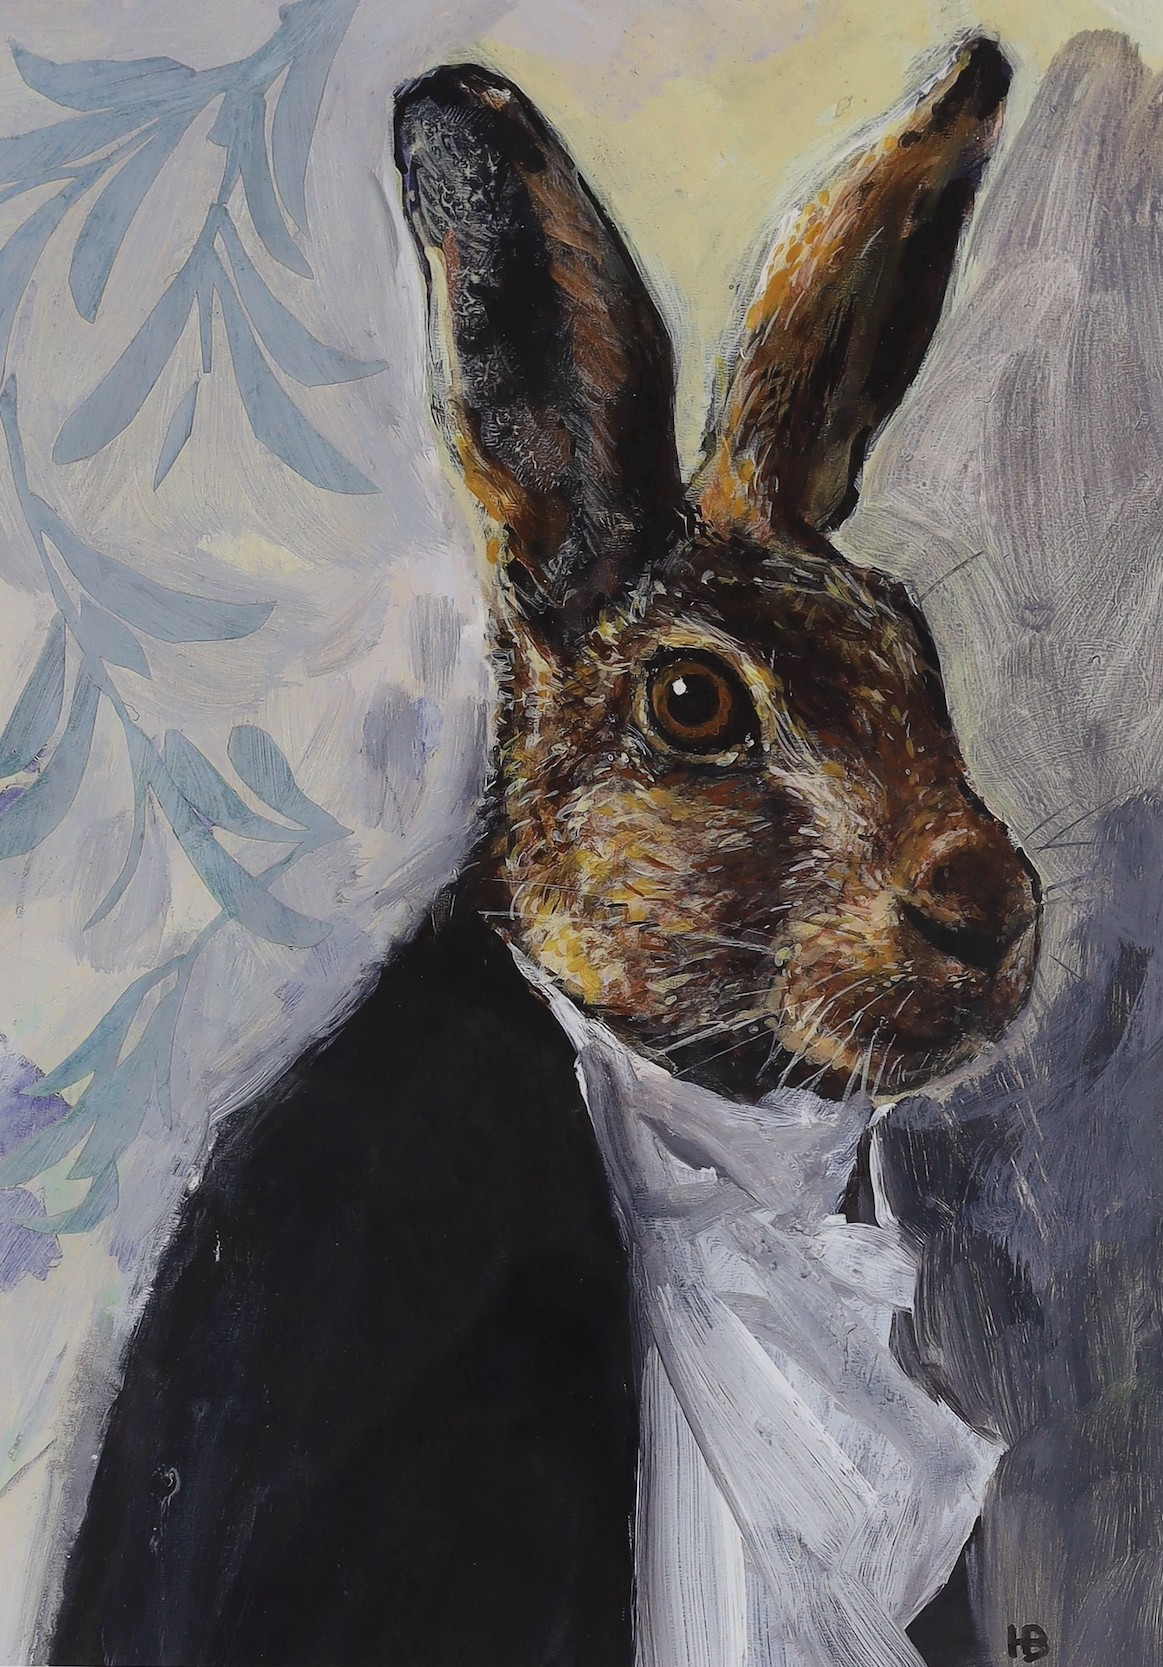 Harry Bunce (b.1967), archival print on Hahnemuhle paper, 'Lepus', initialled in pencil and numbered 200/468, 70 x 53cm